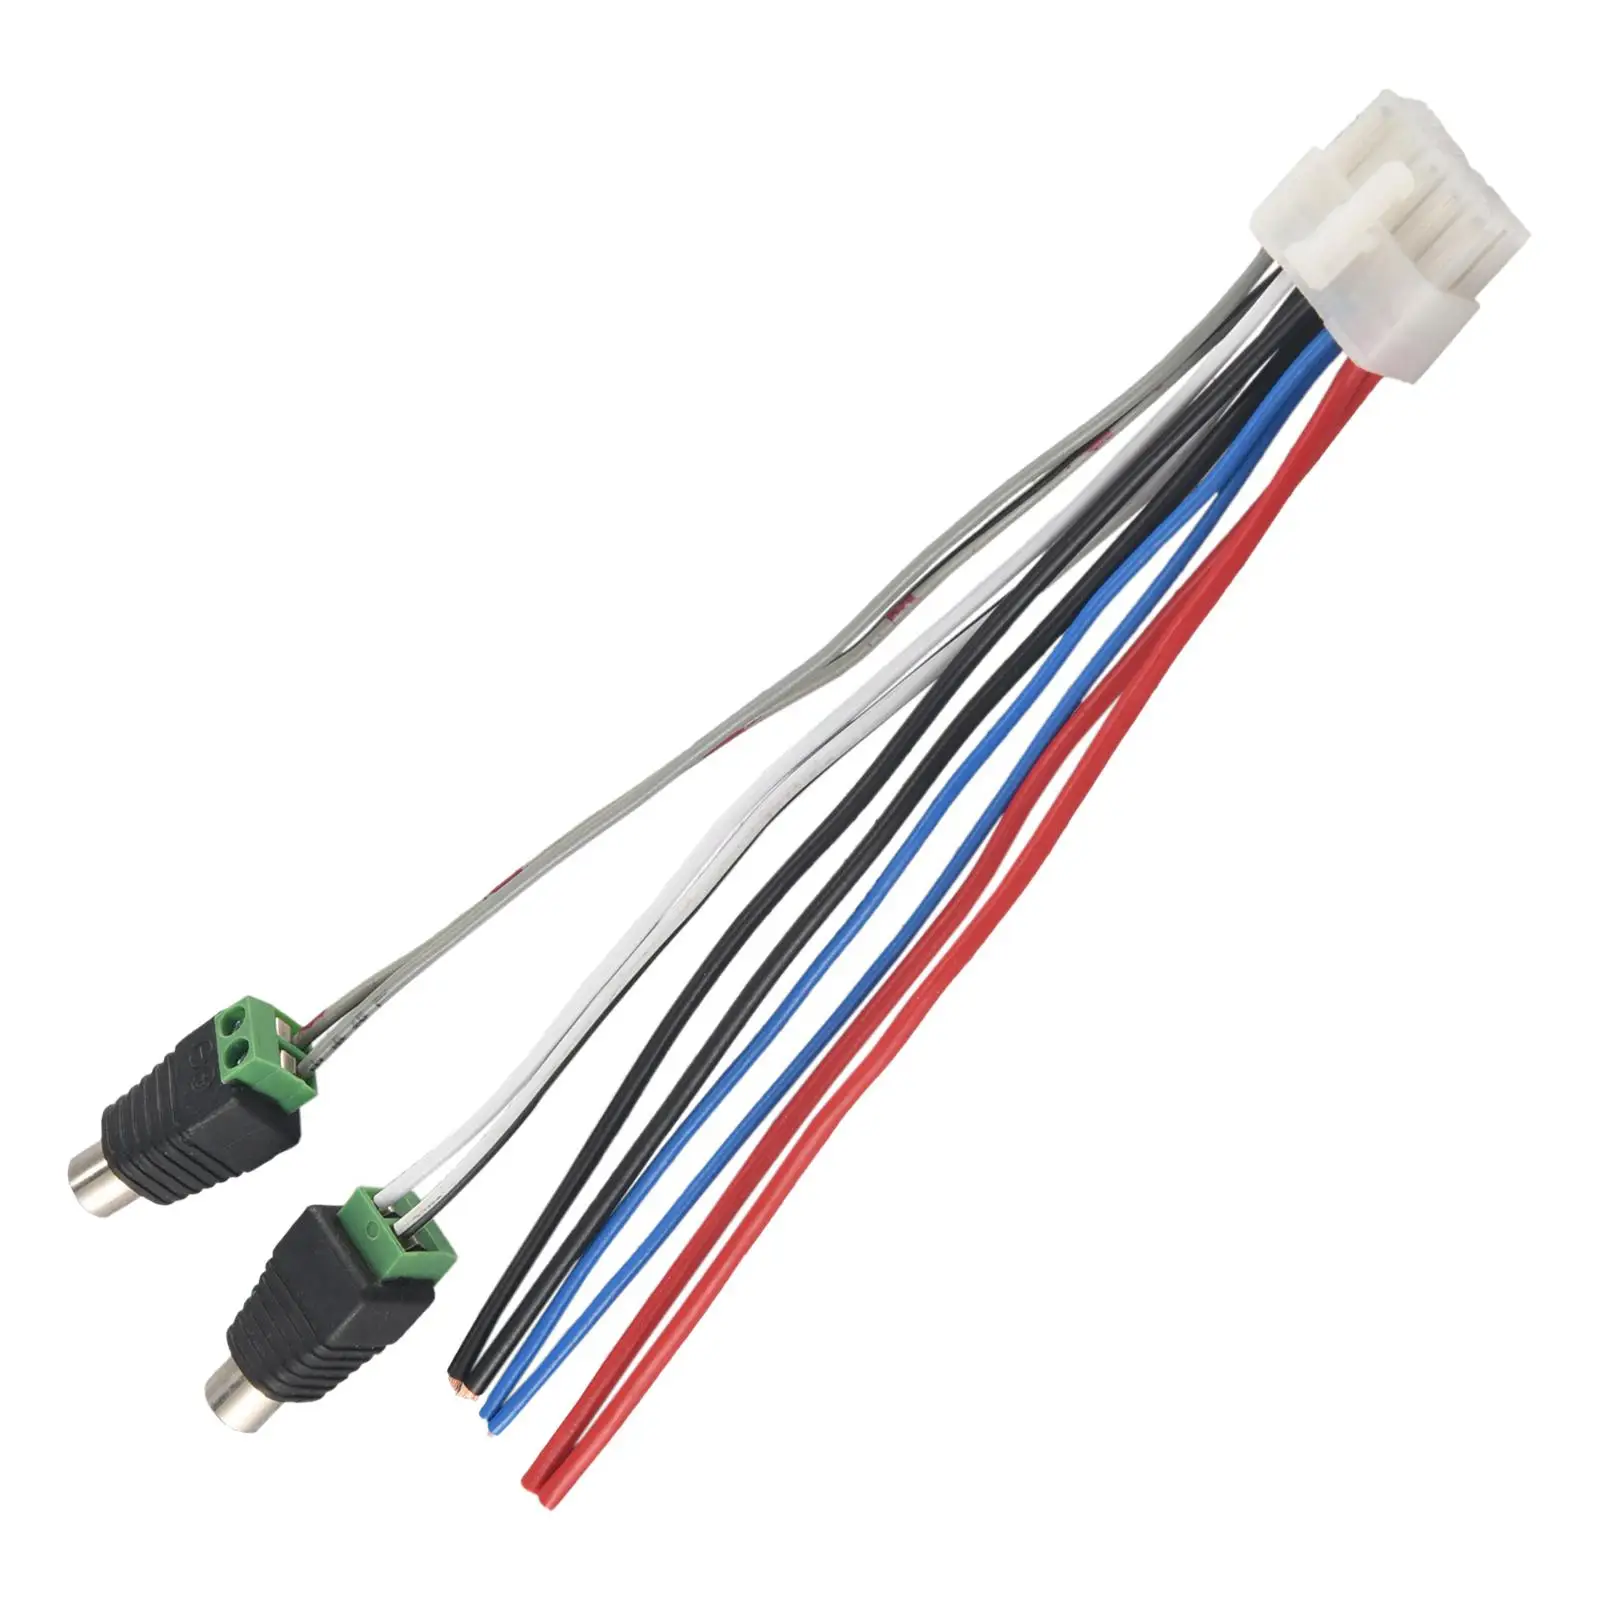 Universal Power Input Speaker Wire Harness Replacement 10 Pin Plug RCA Connector 15cm for Dual Tbx10A Amplifier